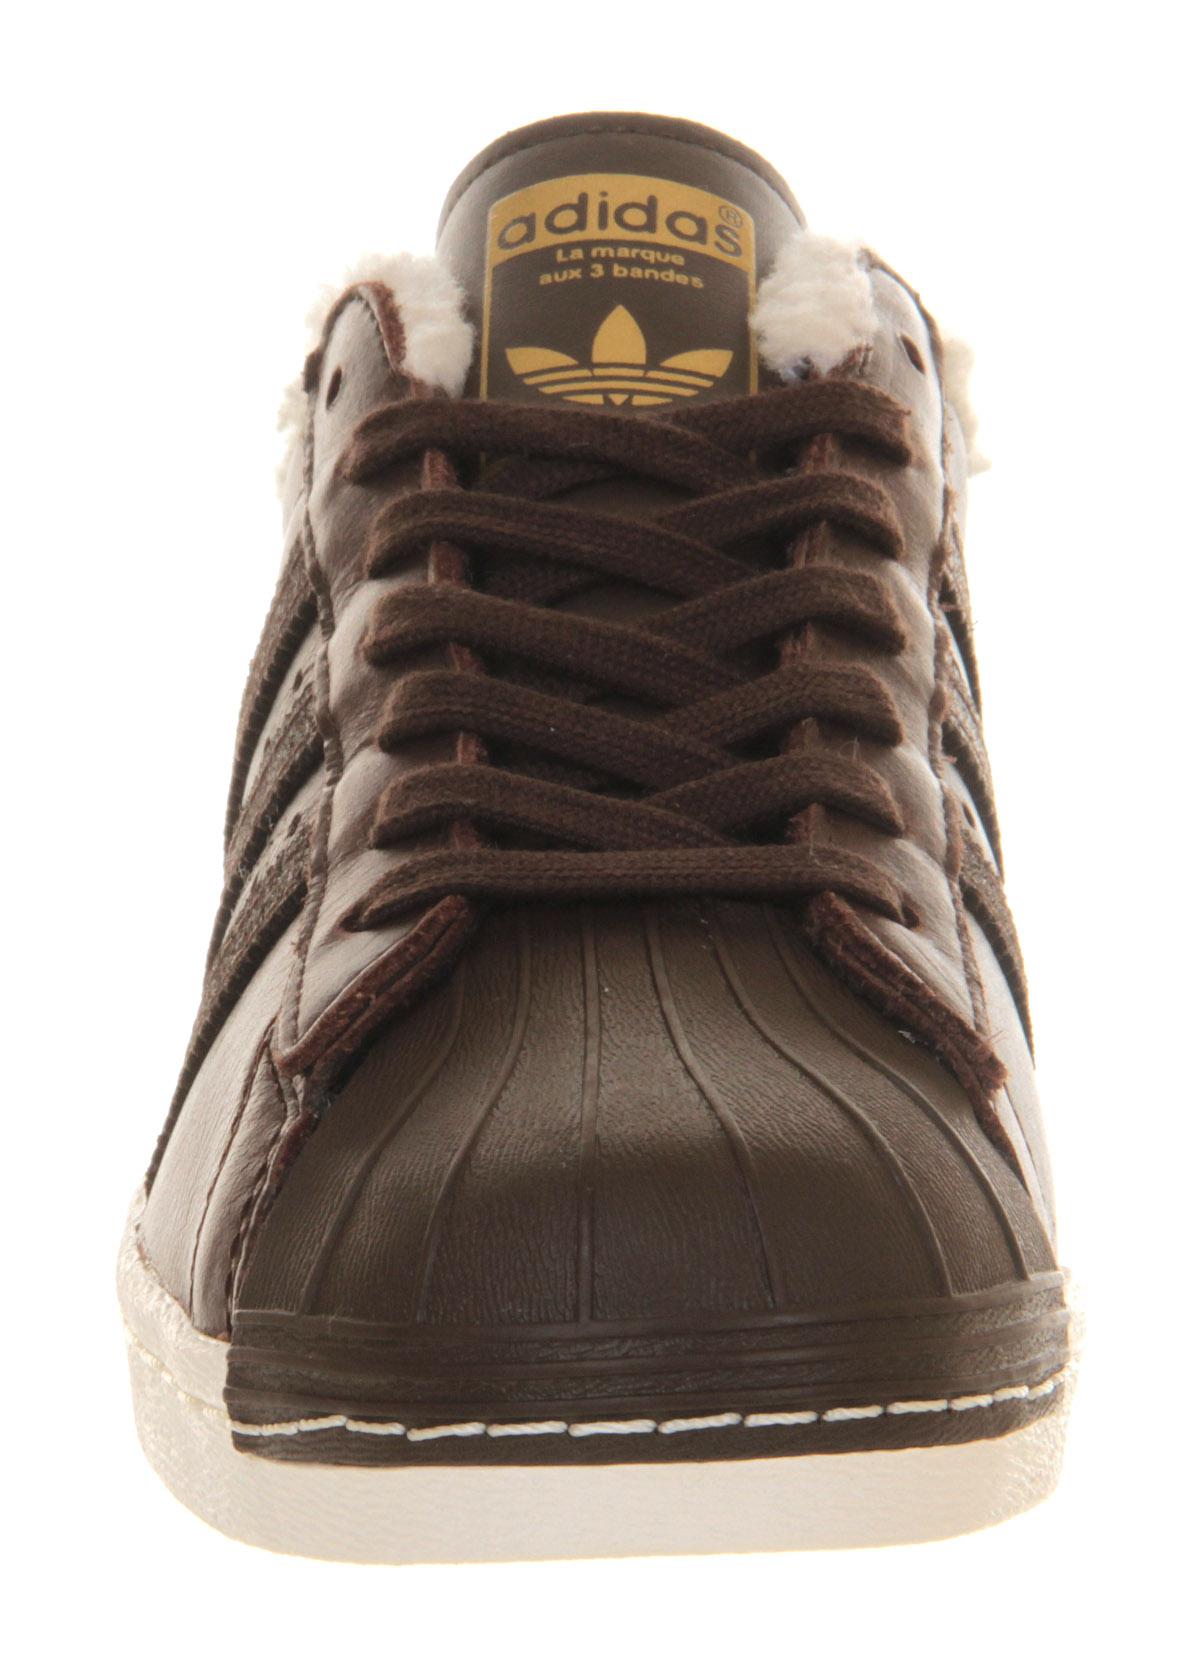 adidas Leather Superstar 80s in Brown for Men - Lyst